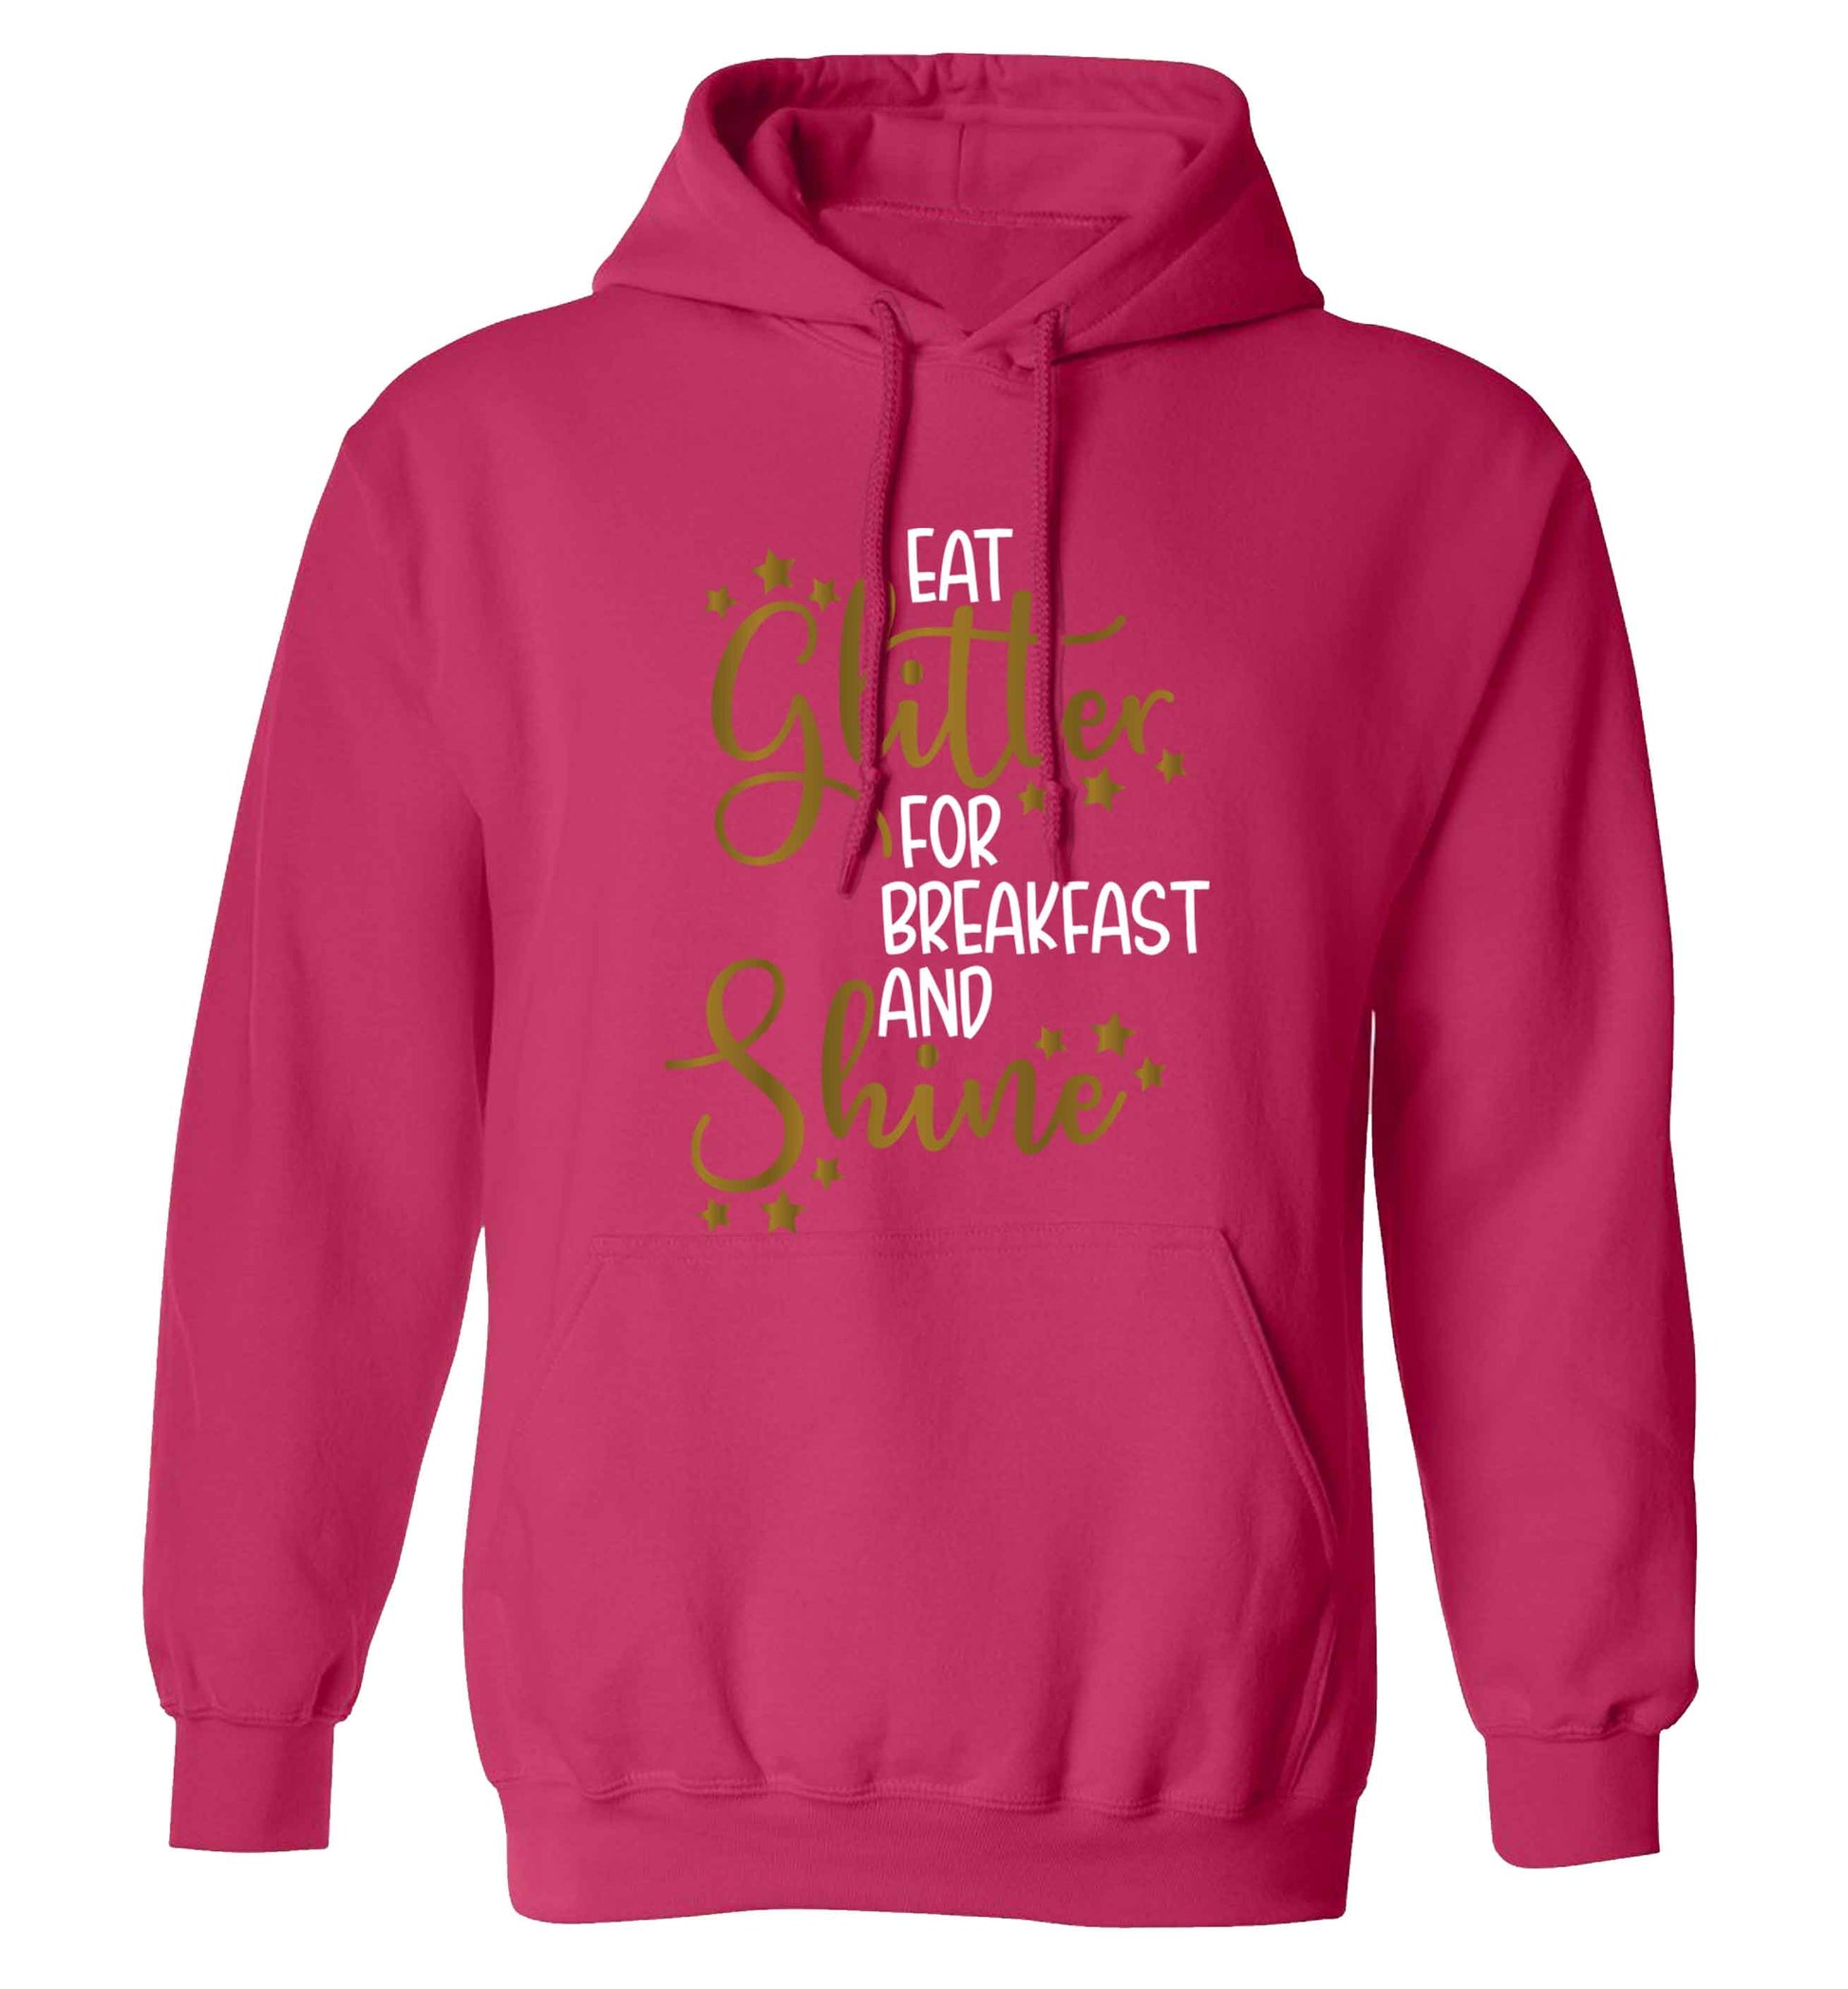 Eat glitter for breakfast and shine all day adults unisex pink hoodie 2XL